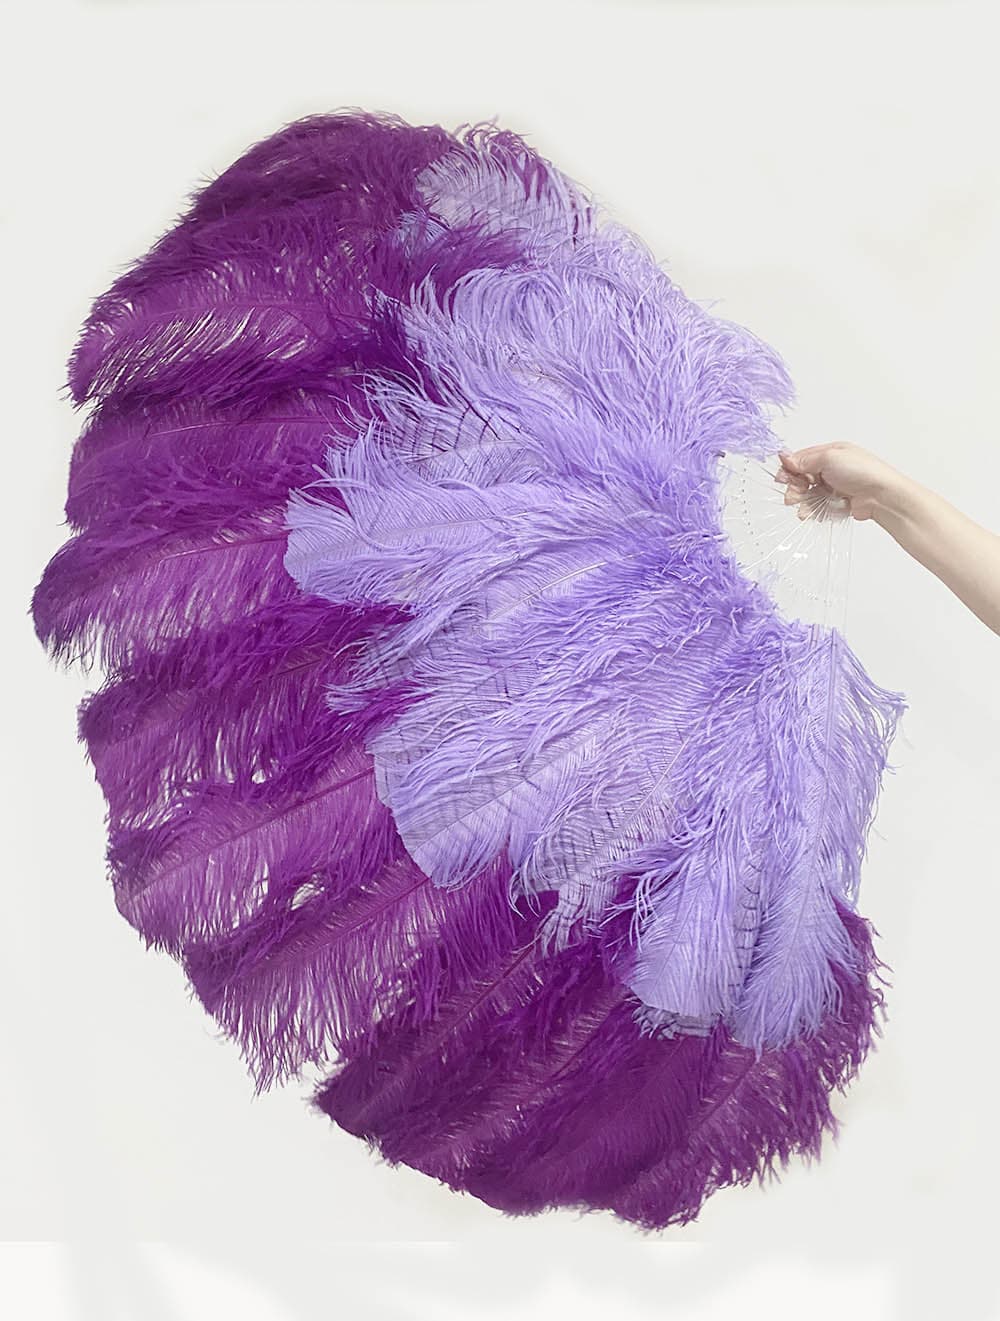 hotfans Mix Dark Purple & Aqua Violet XL 2 Layer Ostrich Feather Fan 34''x 60'' with Travel Leather Bag Right Hand Fan / Transparent Staves